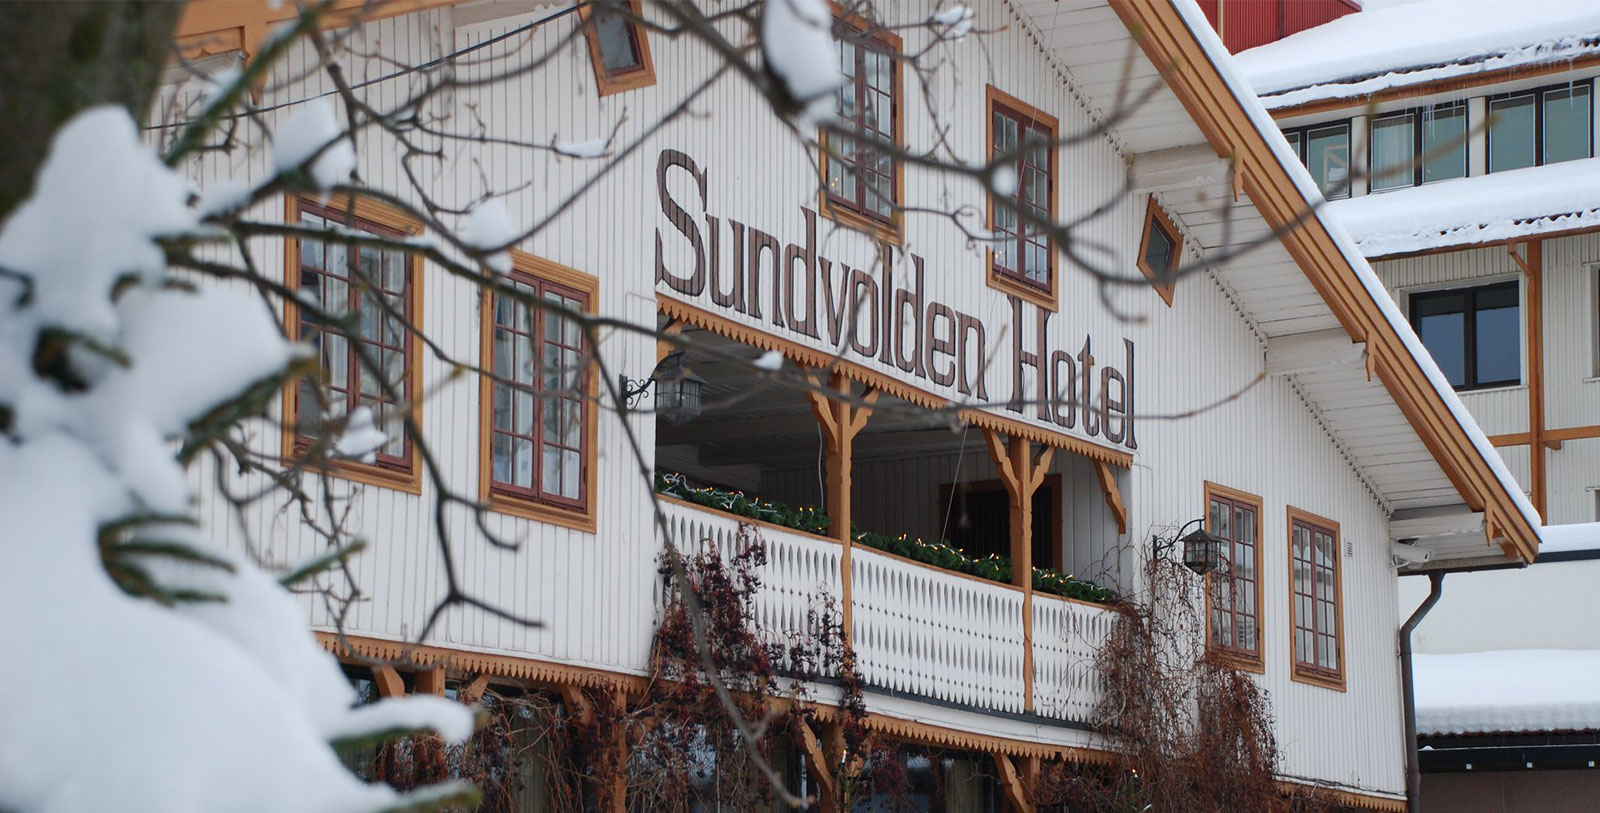 Image of Hotel Exterior Sundvolden Hotel, 1648, Member of Historic Hotels Worldwide, in Krokkleiva, Norway, Special Offers, Discounted Rates, Families, Romantic Escape, Honeymoons, Anniversaries, Reunions